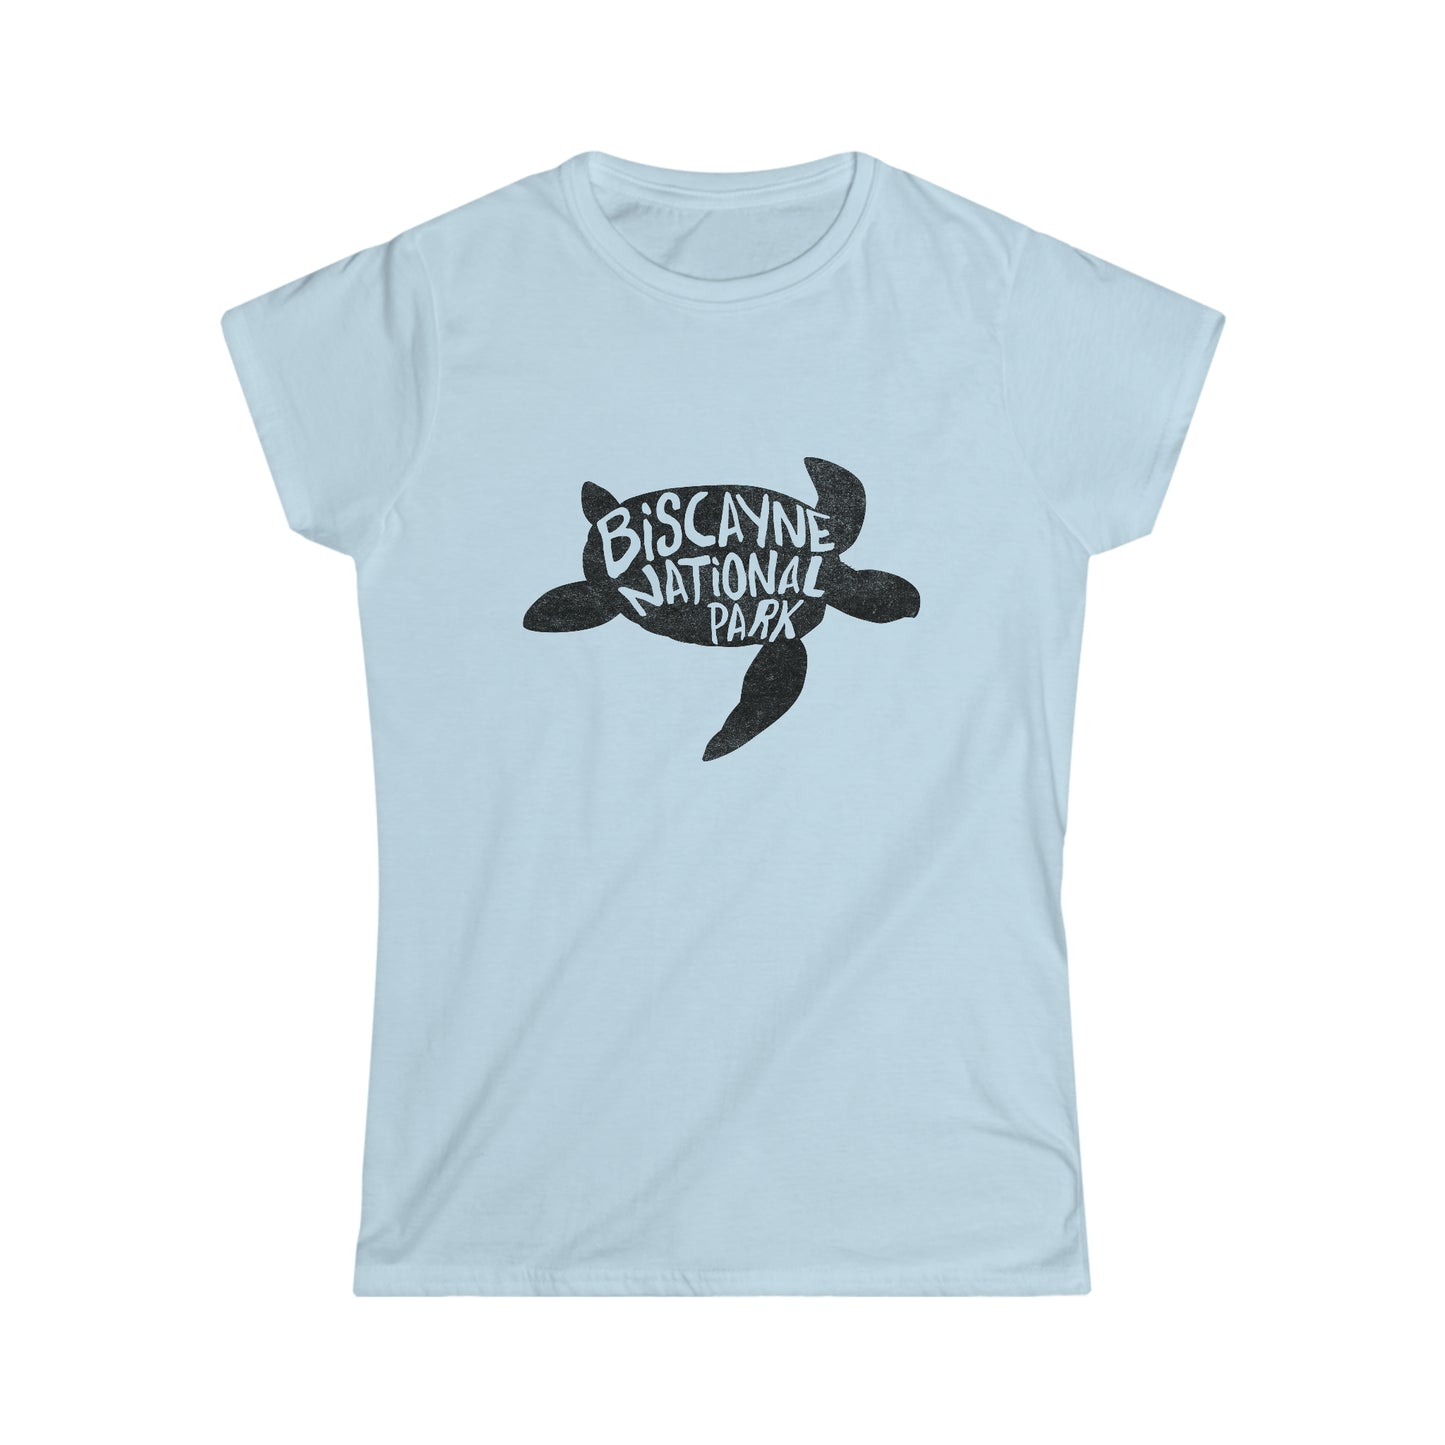 Biscayne National Park Women's T-Shirt - Sea Turtle